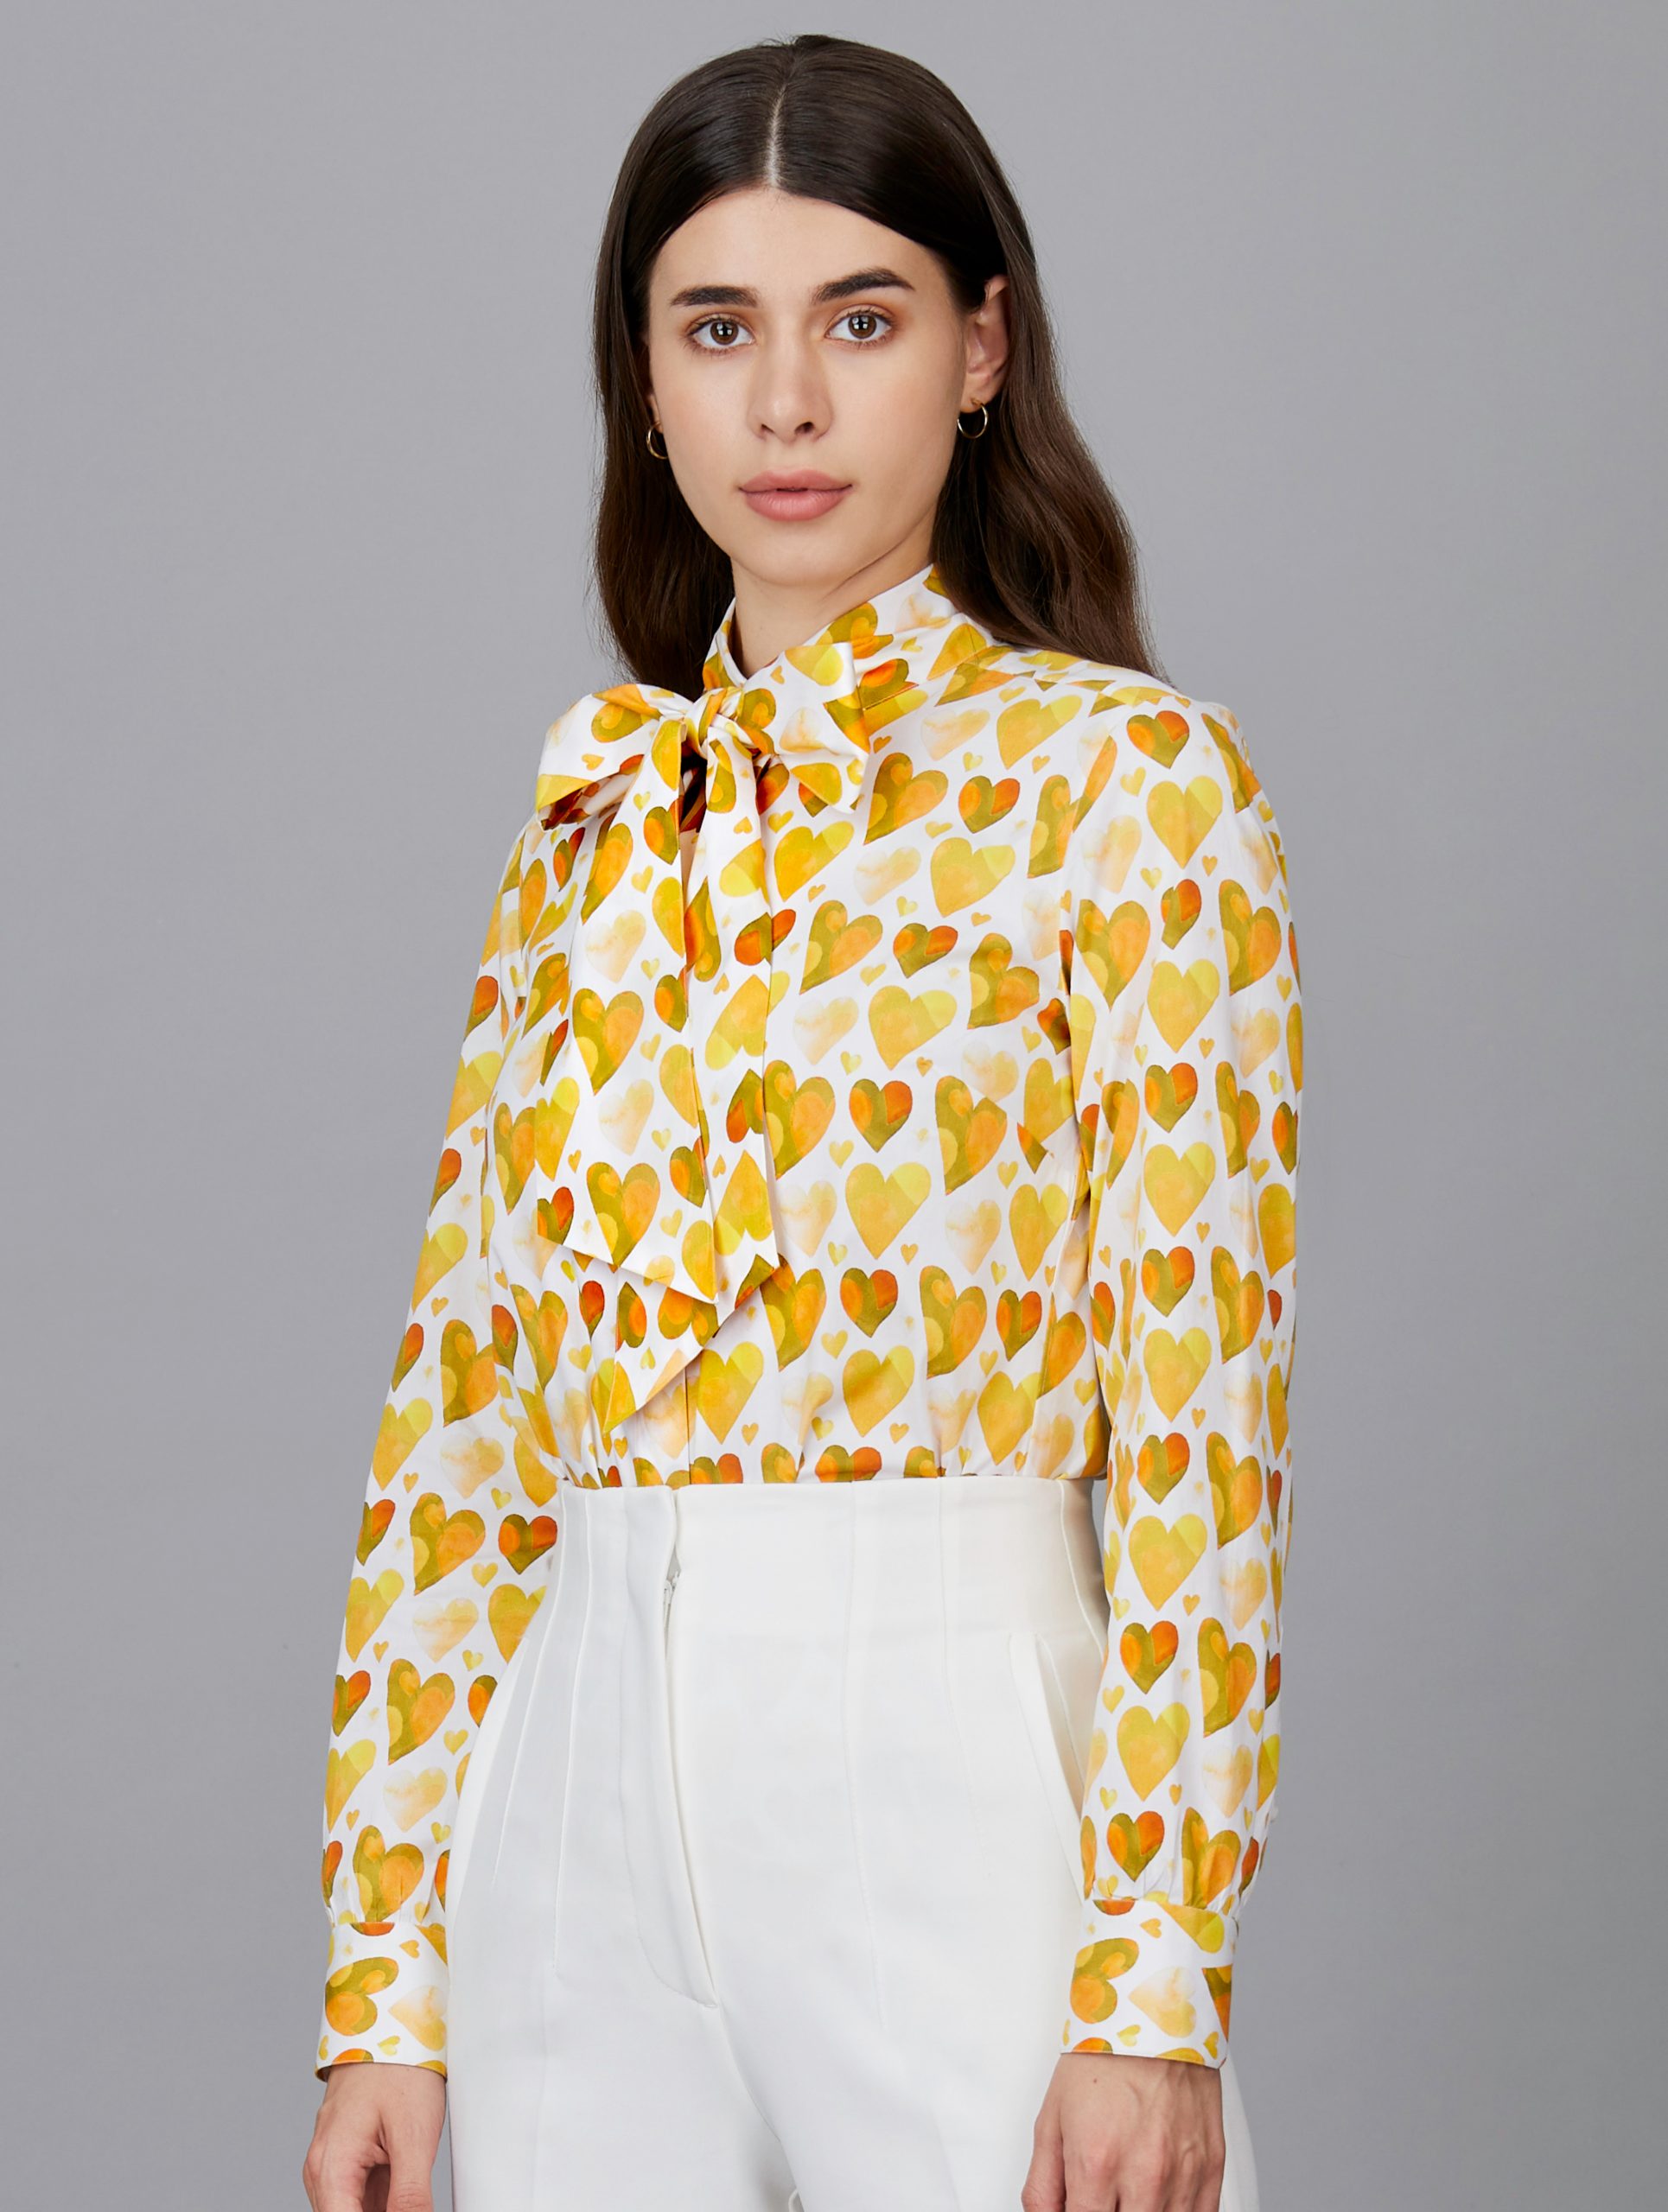 Small Bow Shirt in Yellow Heart Print